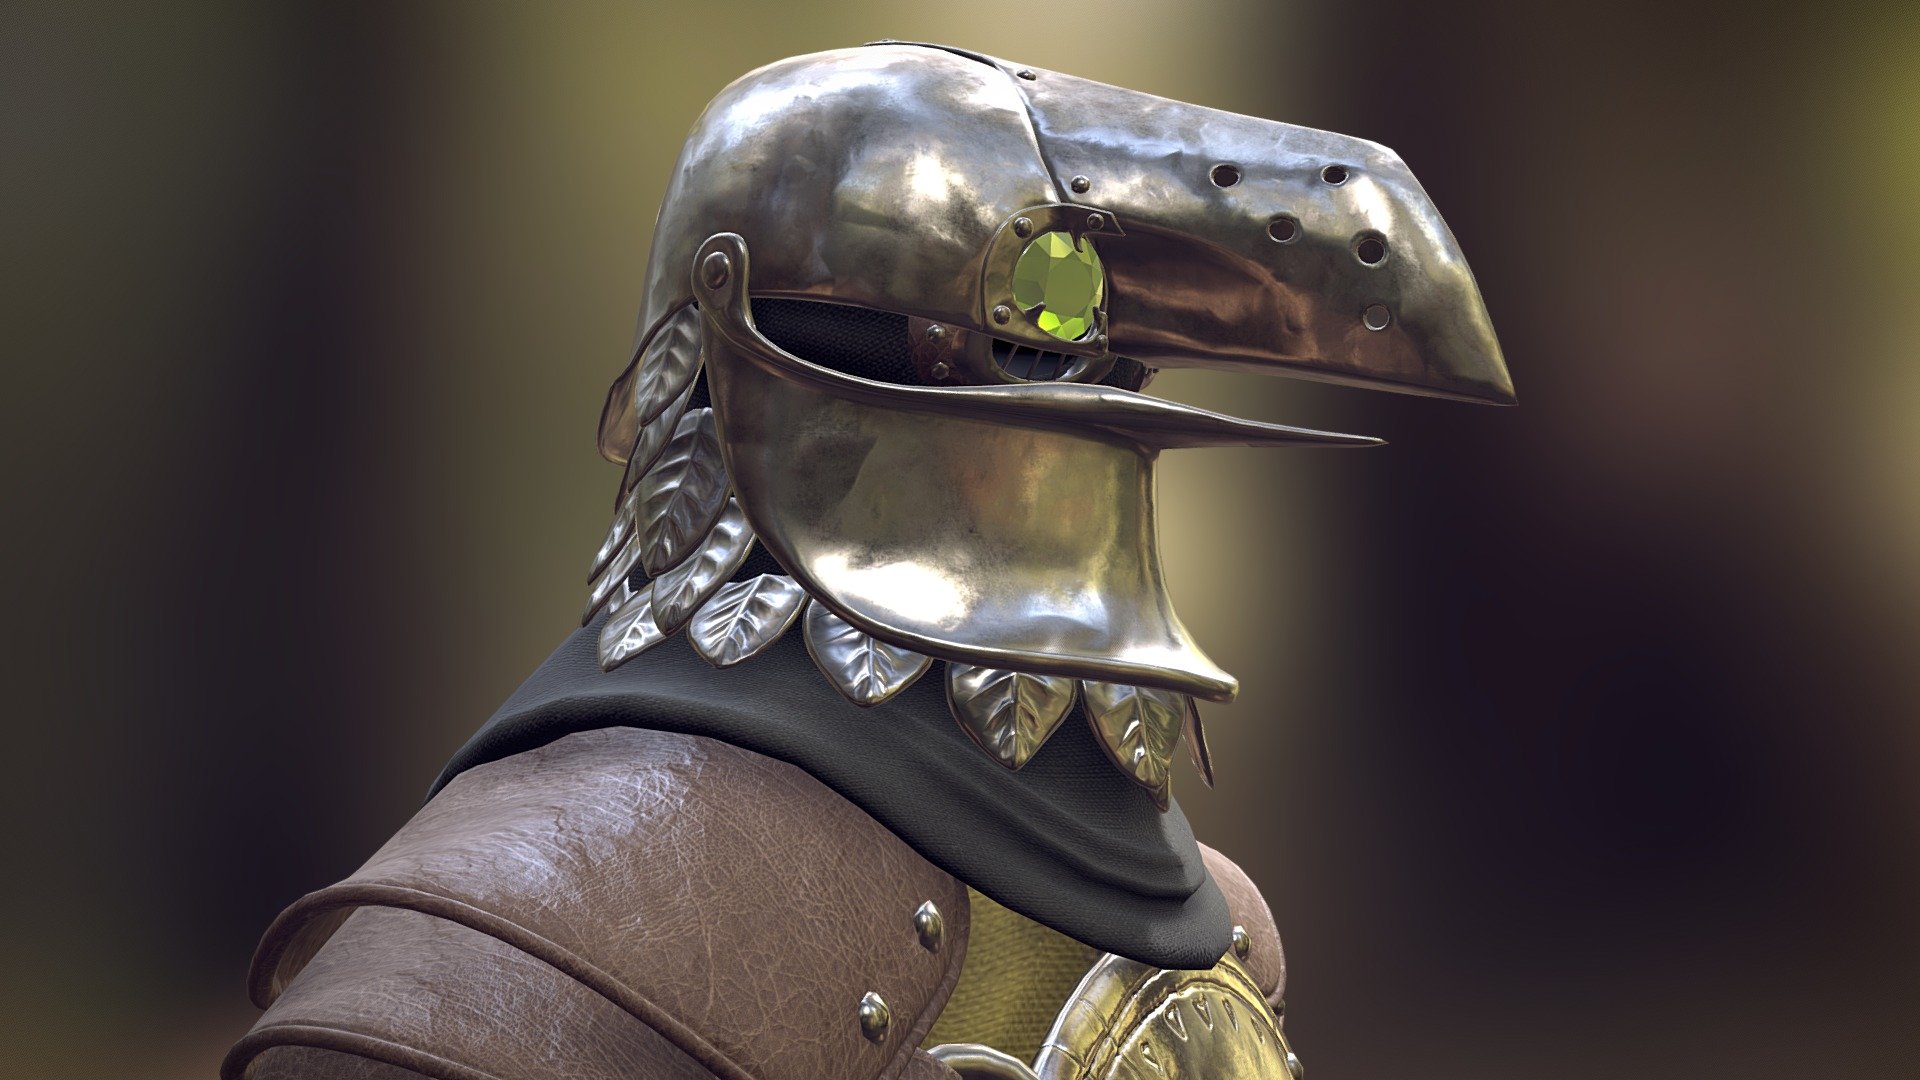 A plague helmet I design and model, inspired by plague doctor mask in the 17-18-19th centuries. This one is more medieval, made for a kind of plague knight 3d model